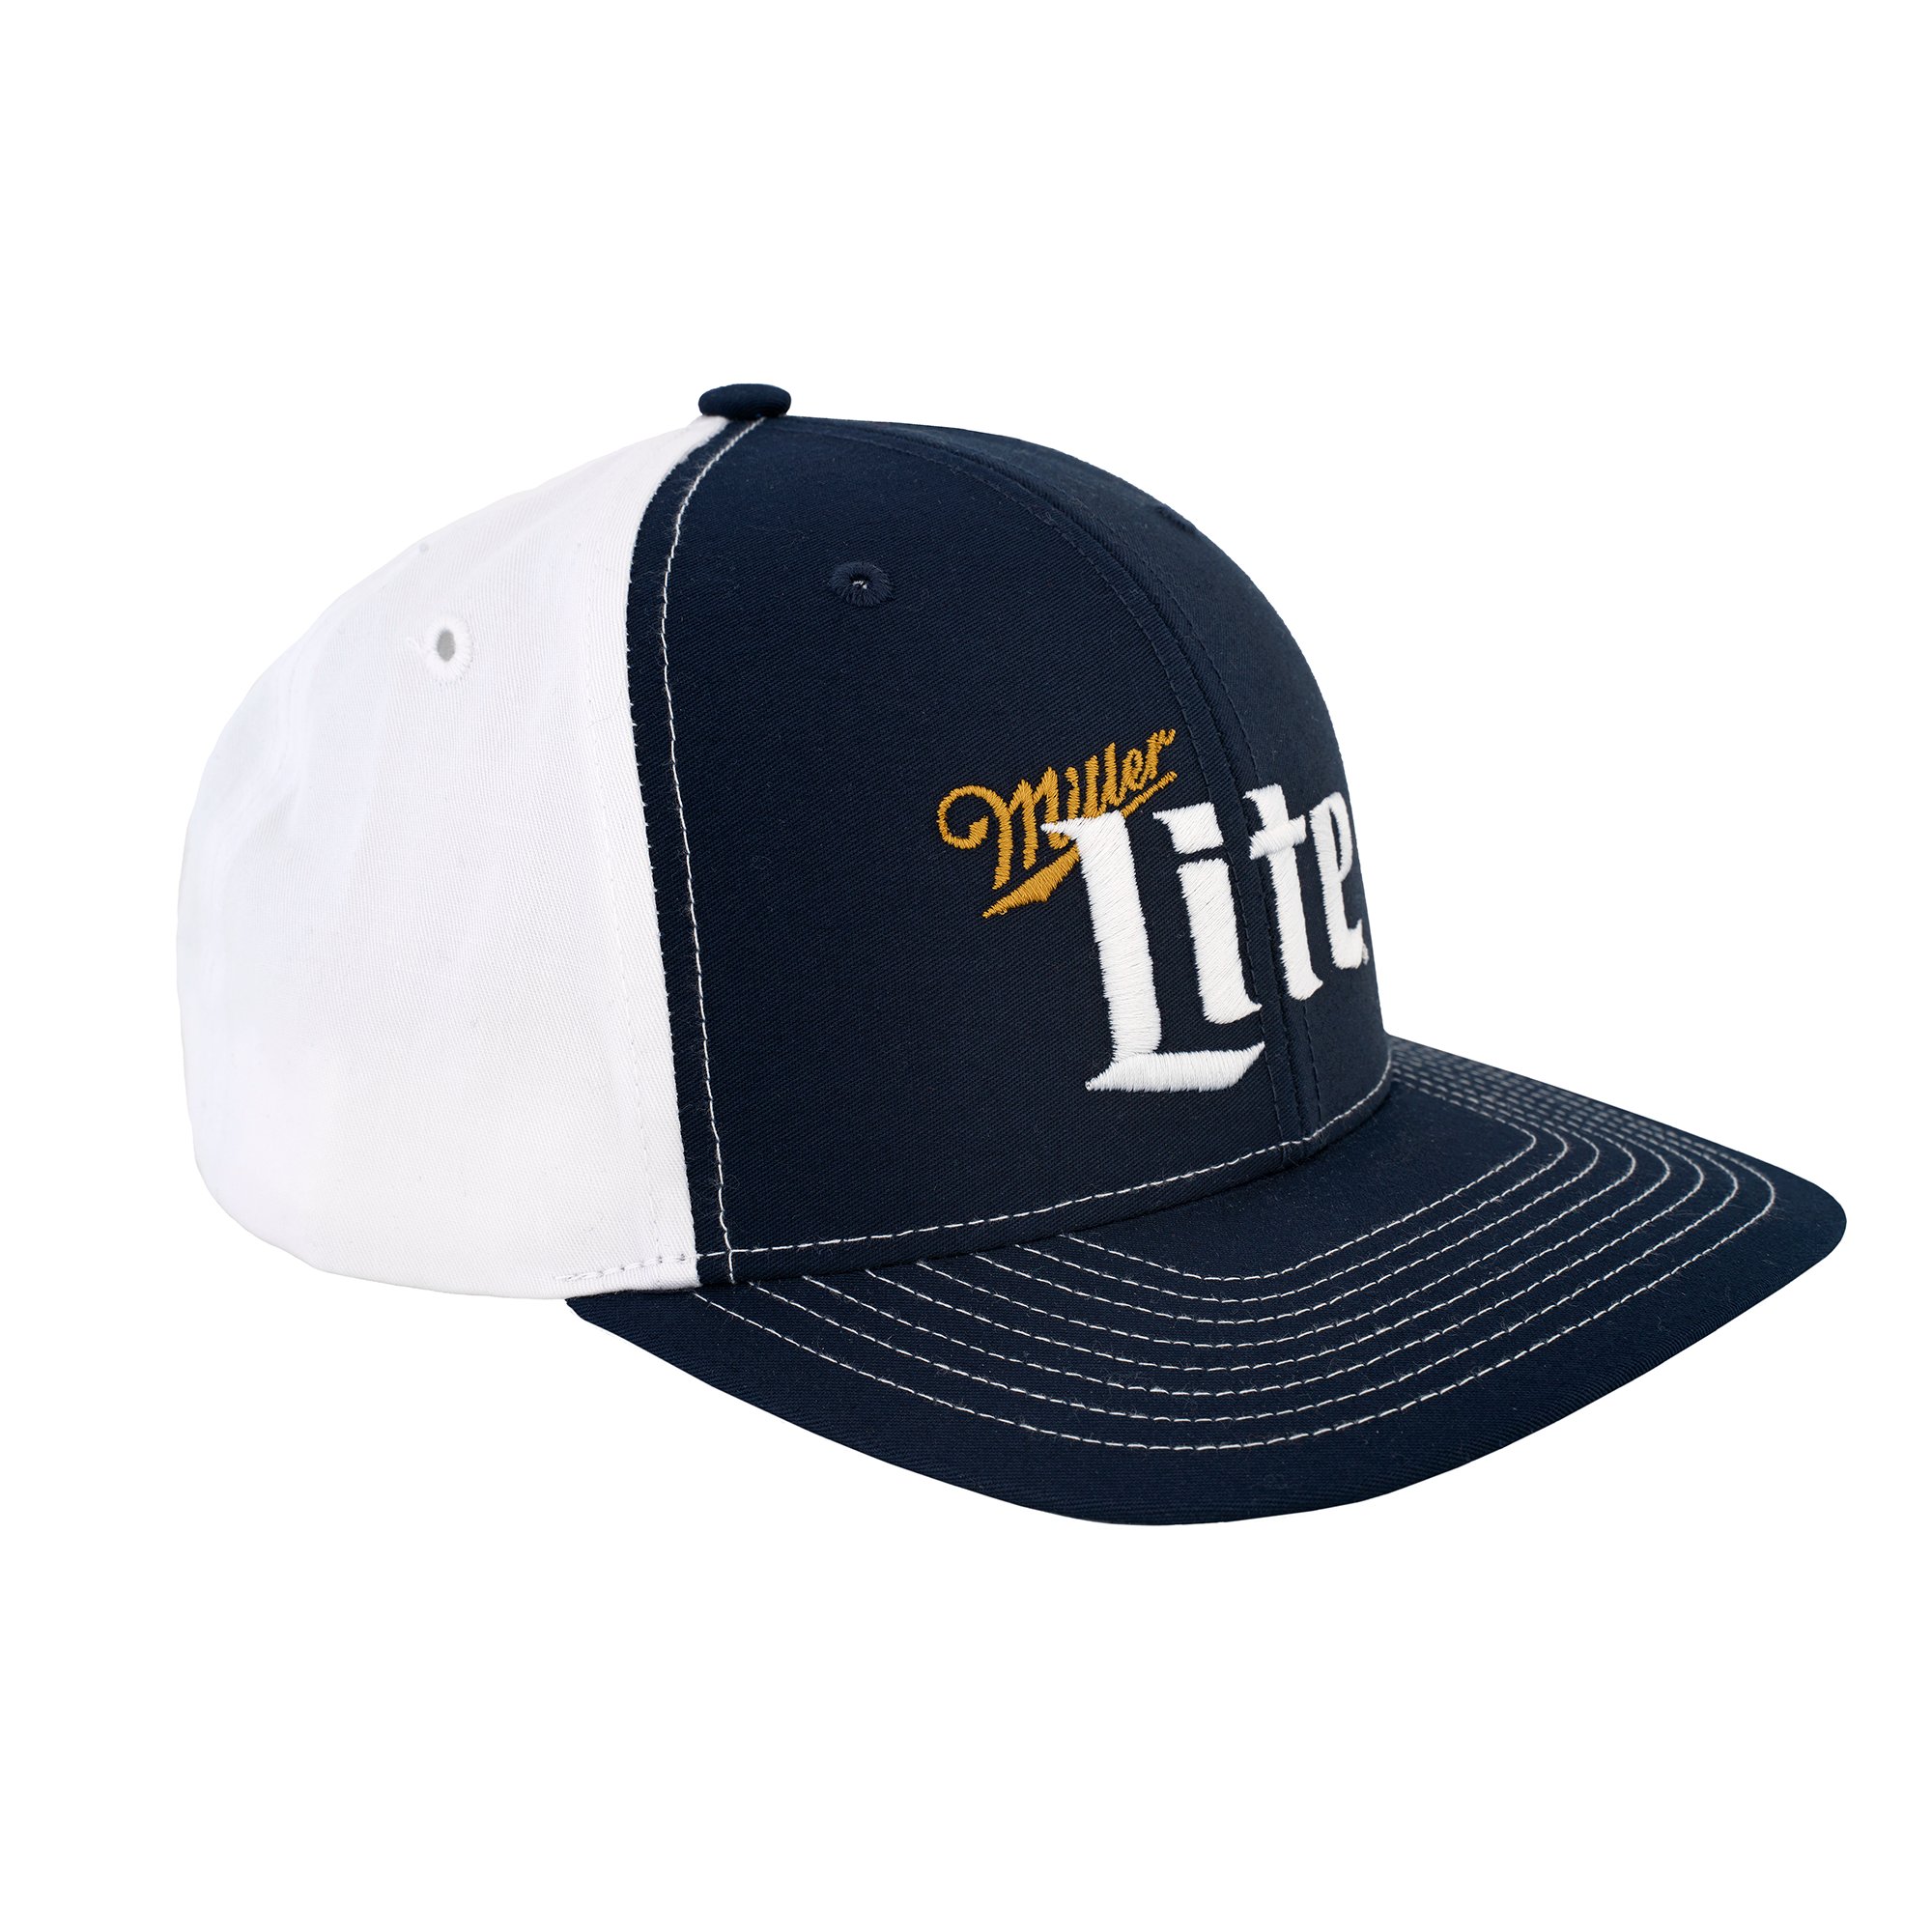 Miller Lite Logo White and Navy Ball Cap Side View